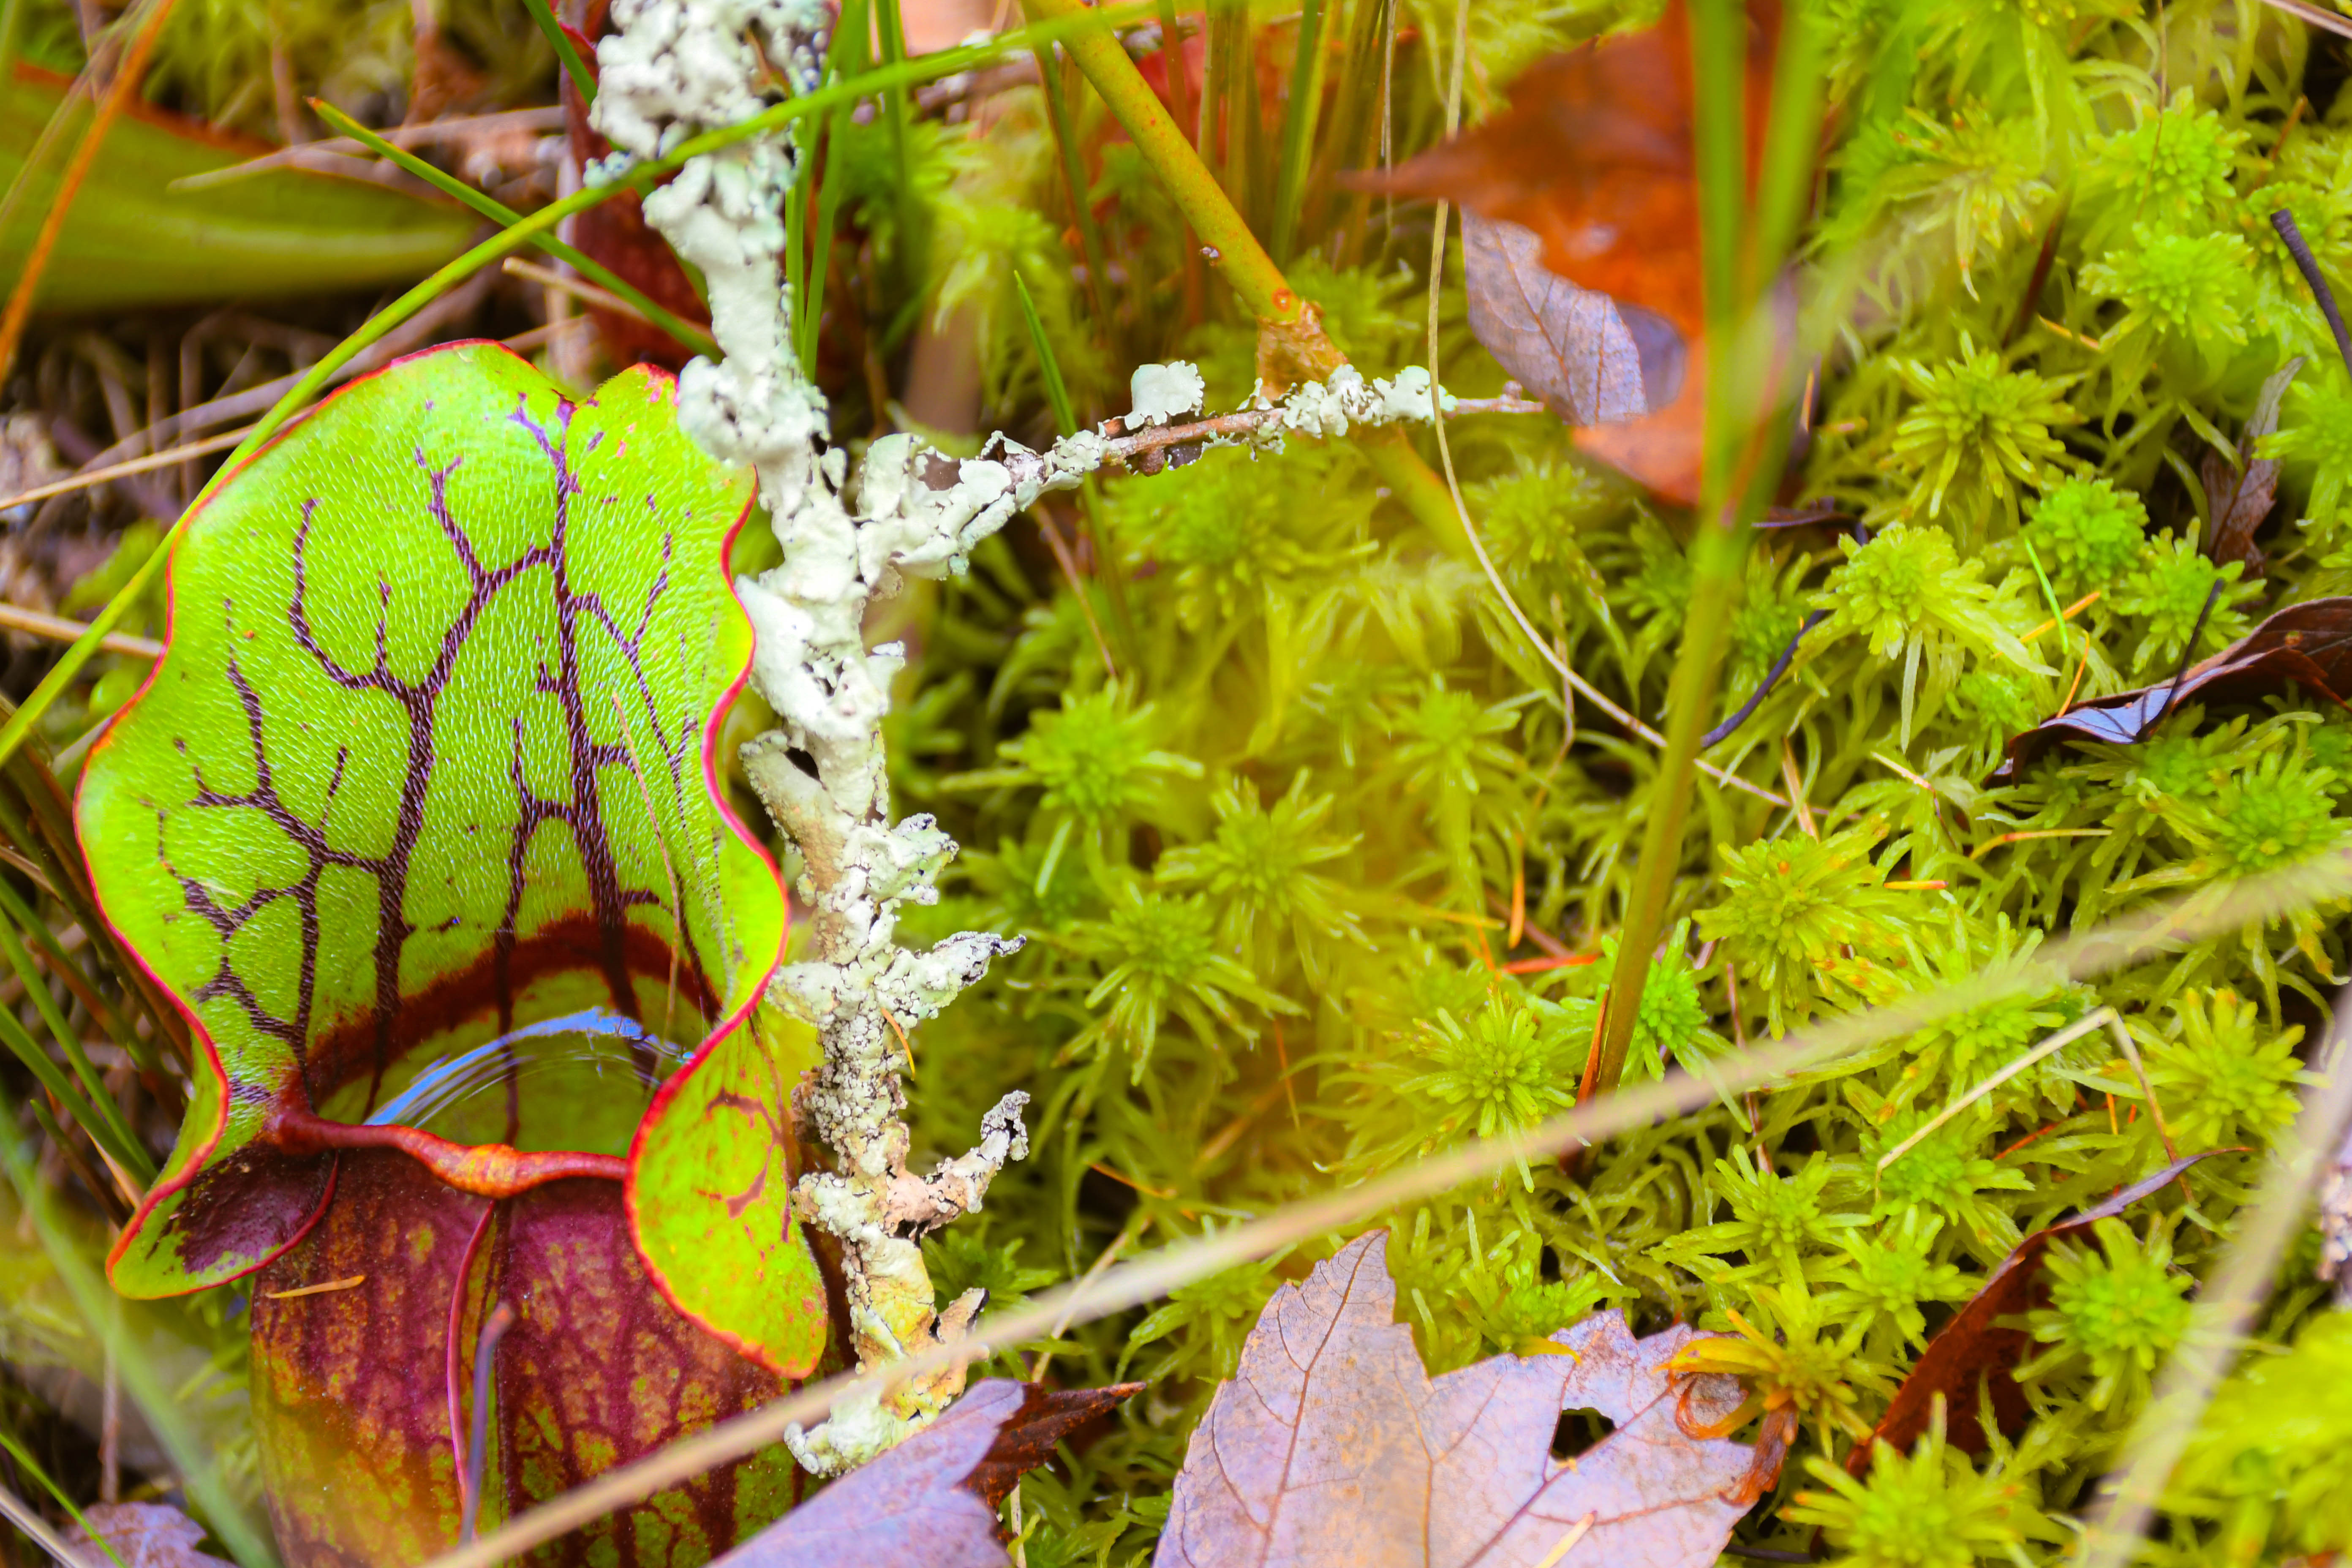 A pitcher plant growns in a bog and holds water in it's center tube.